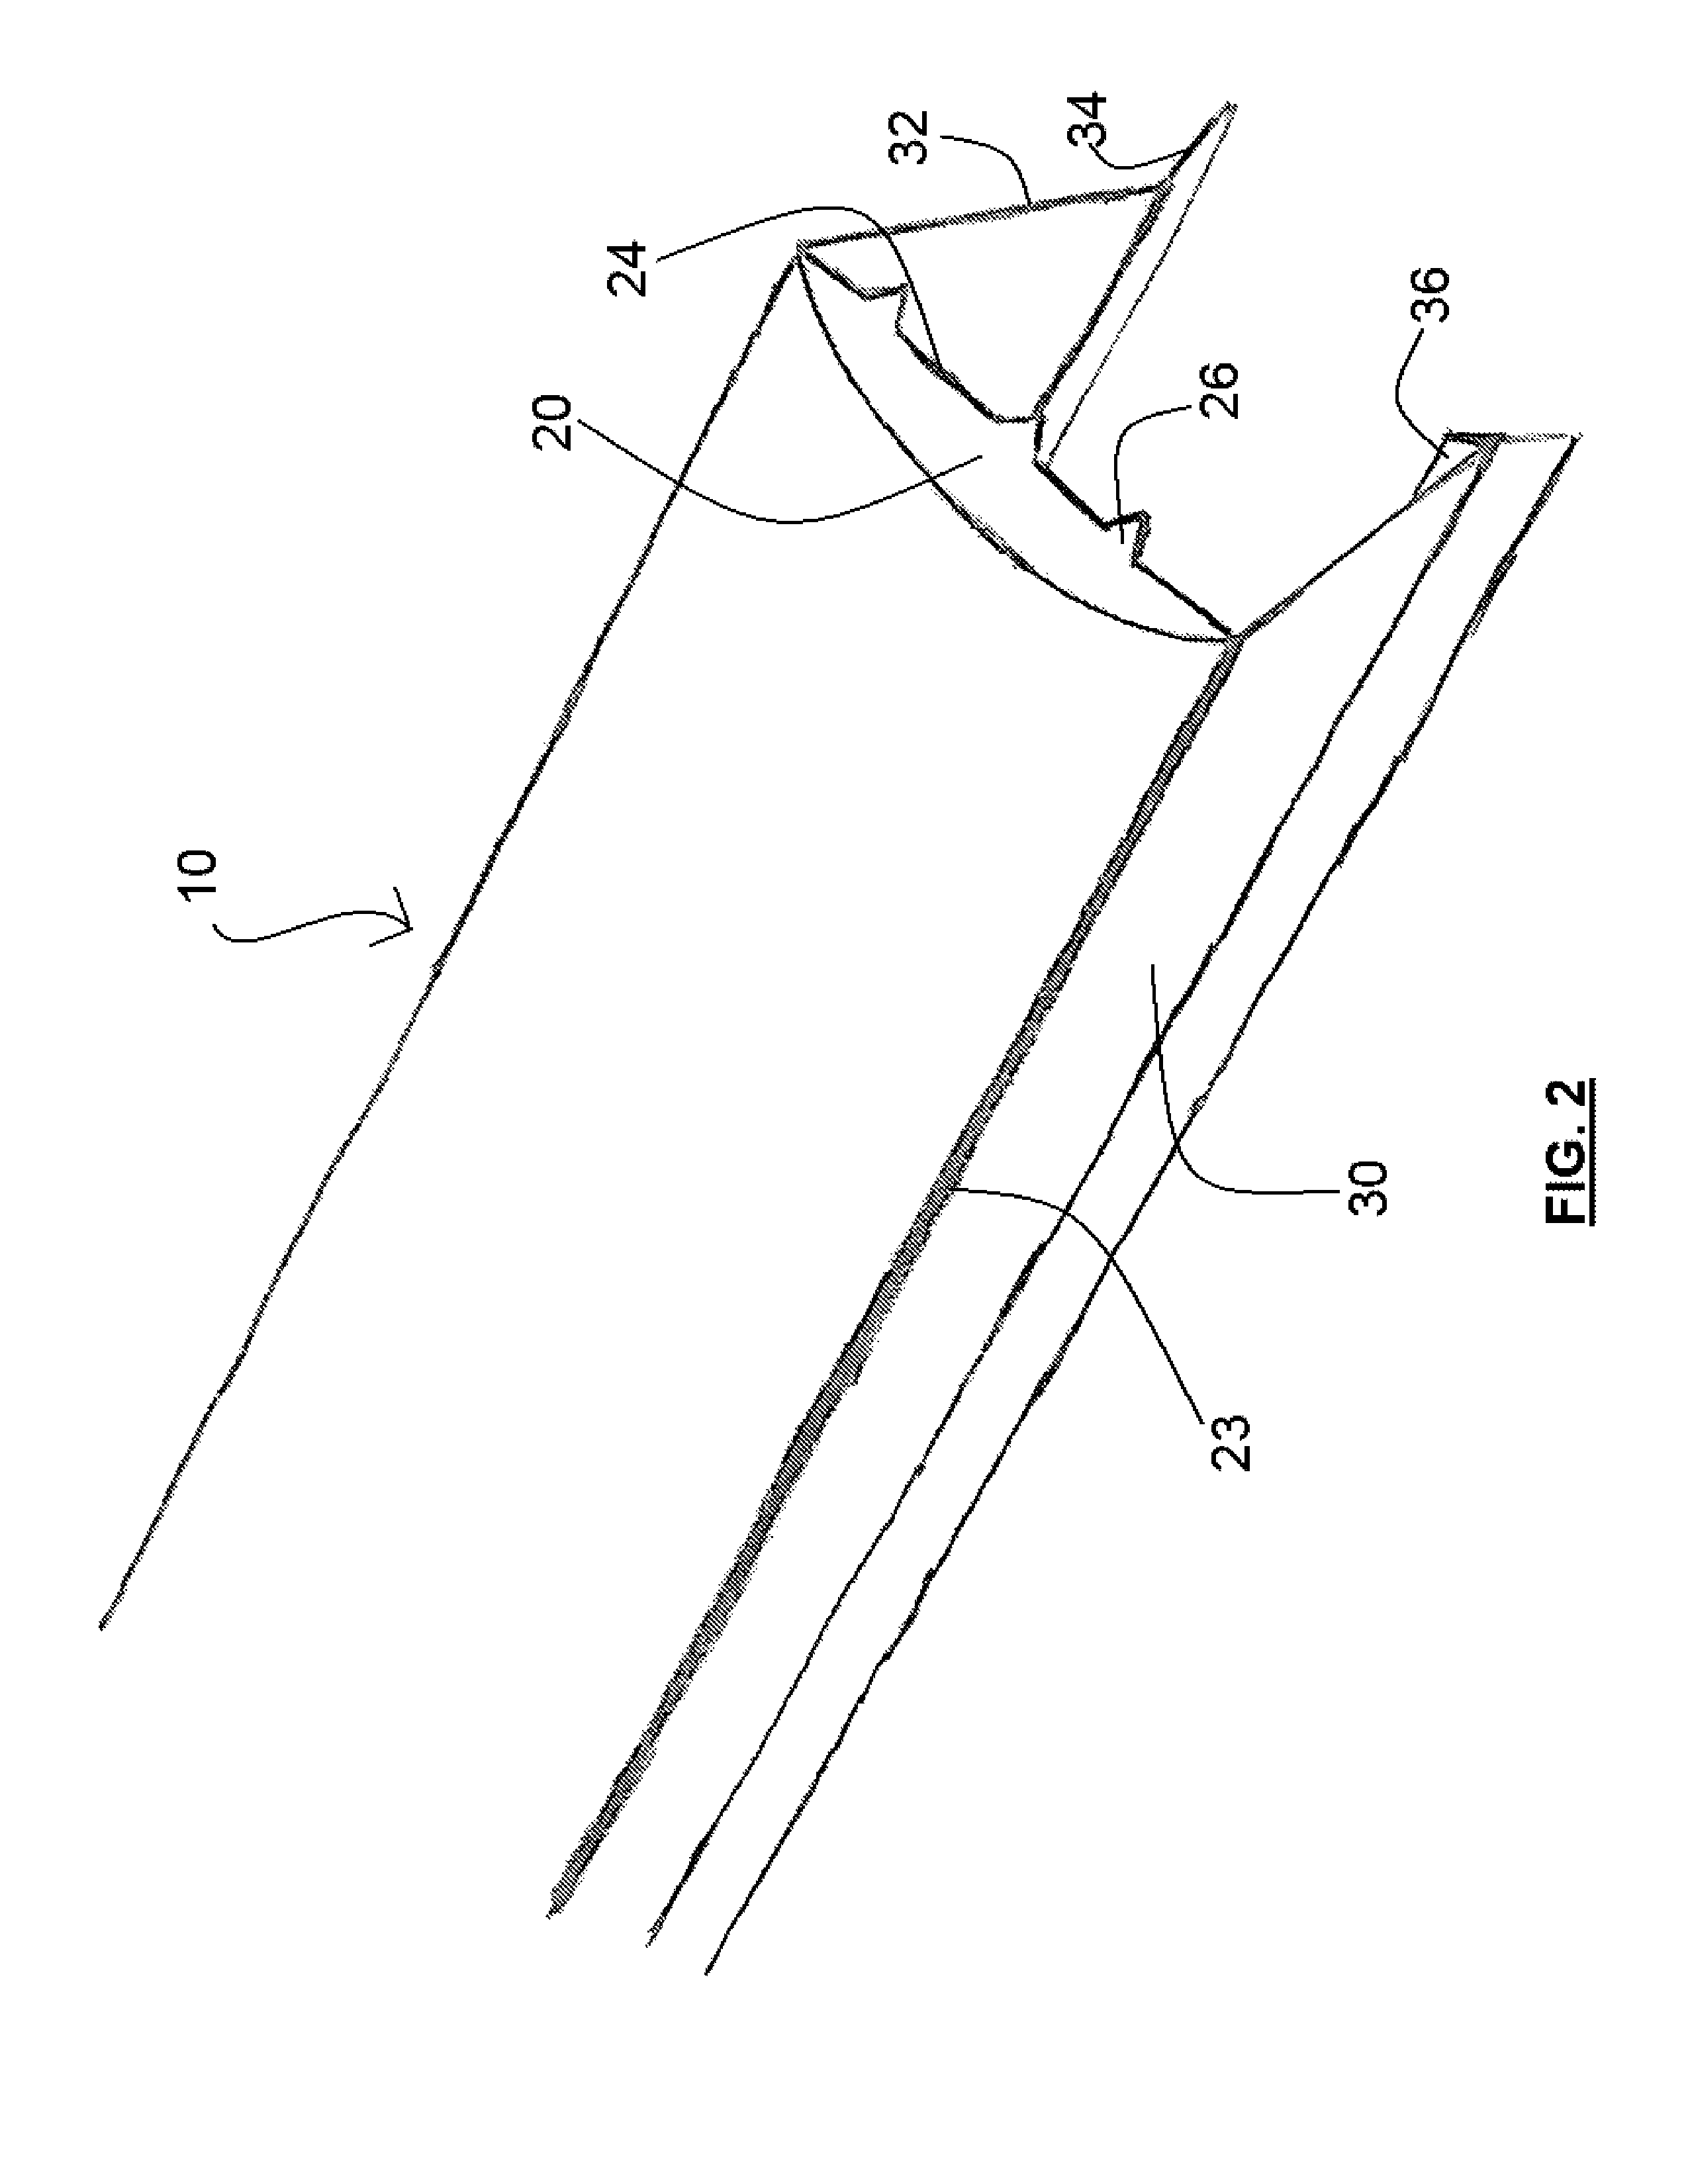 Shielding device and associated methods